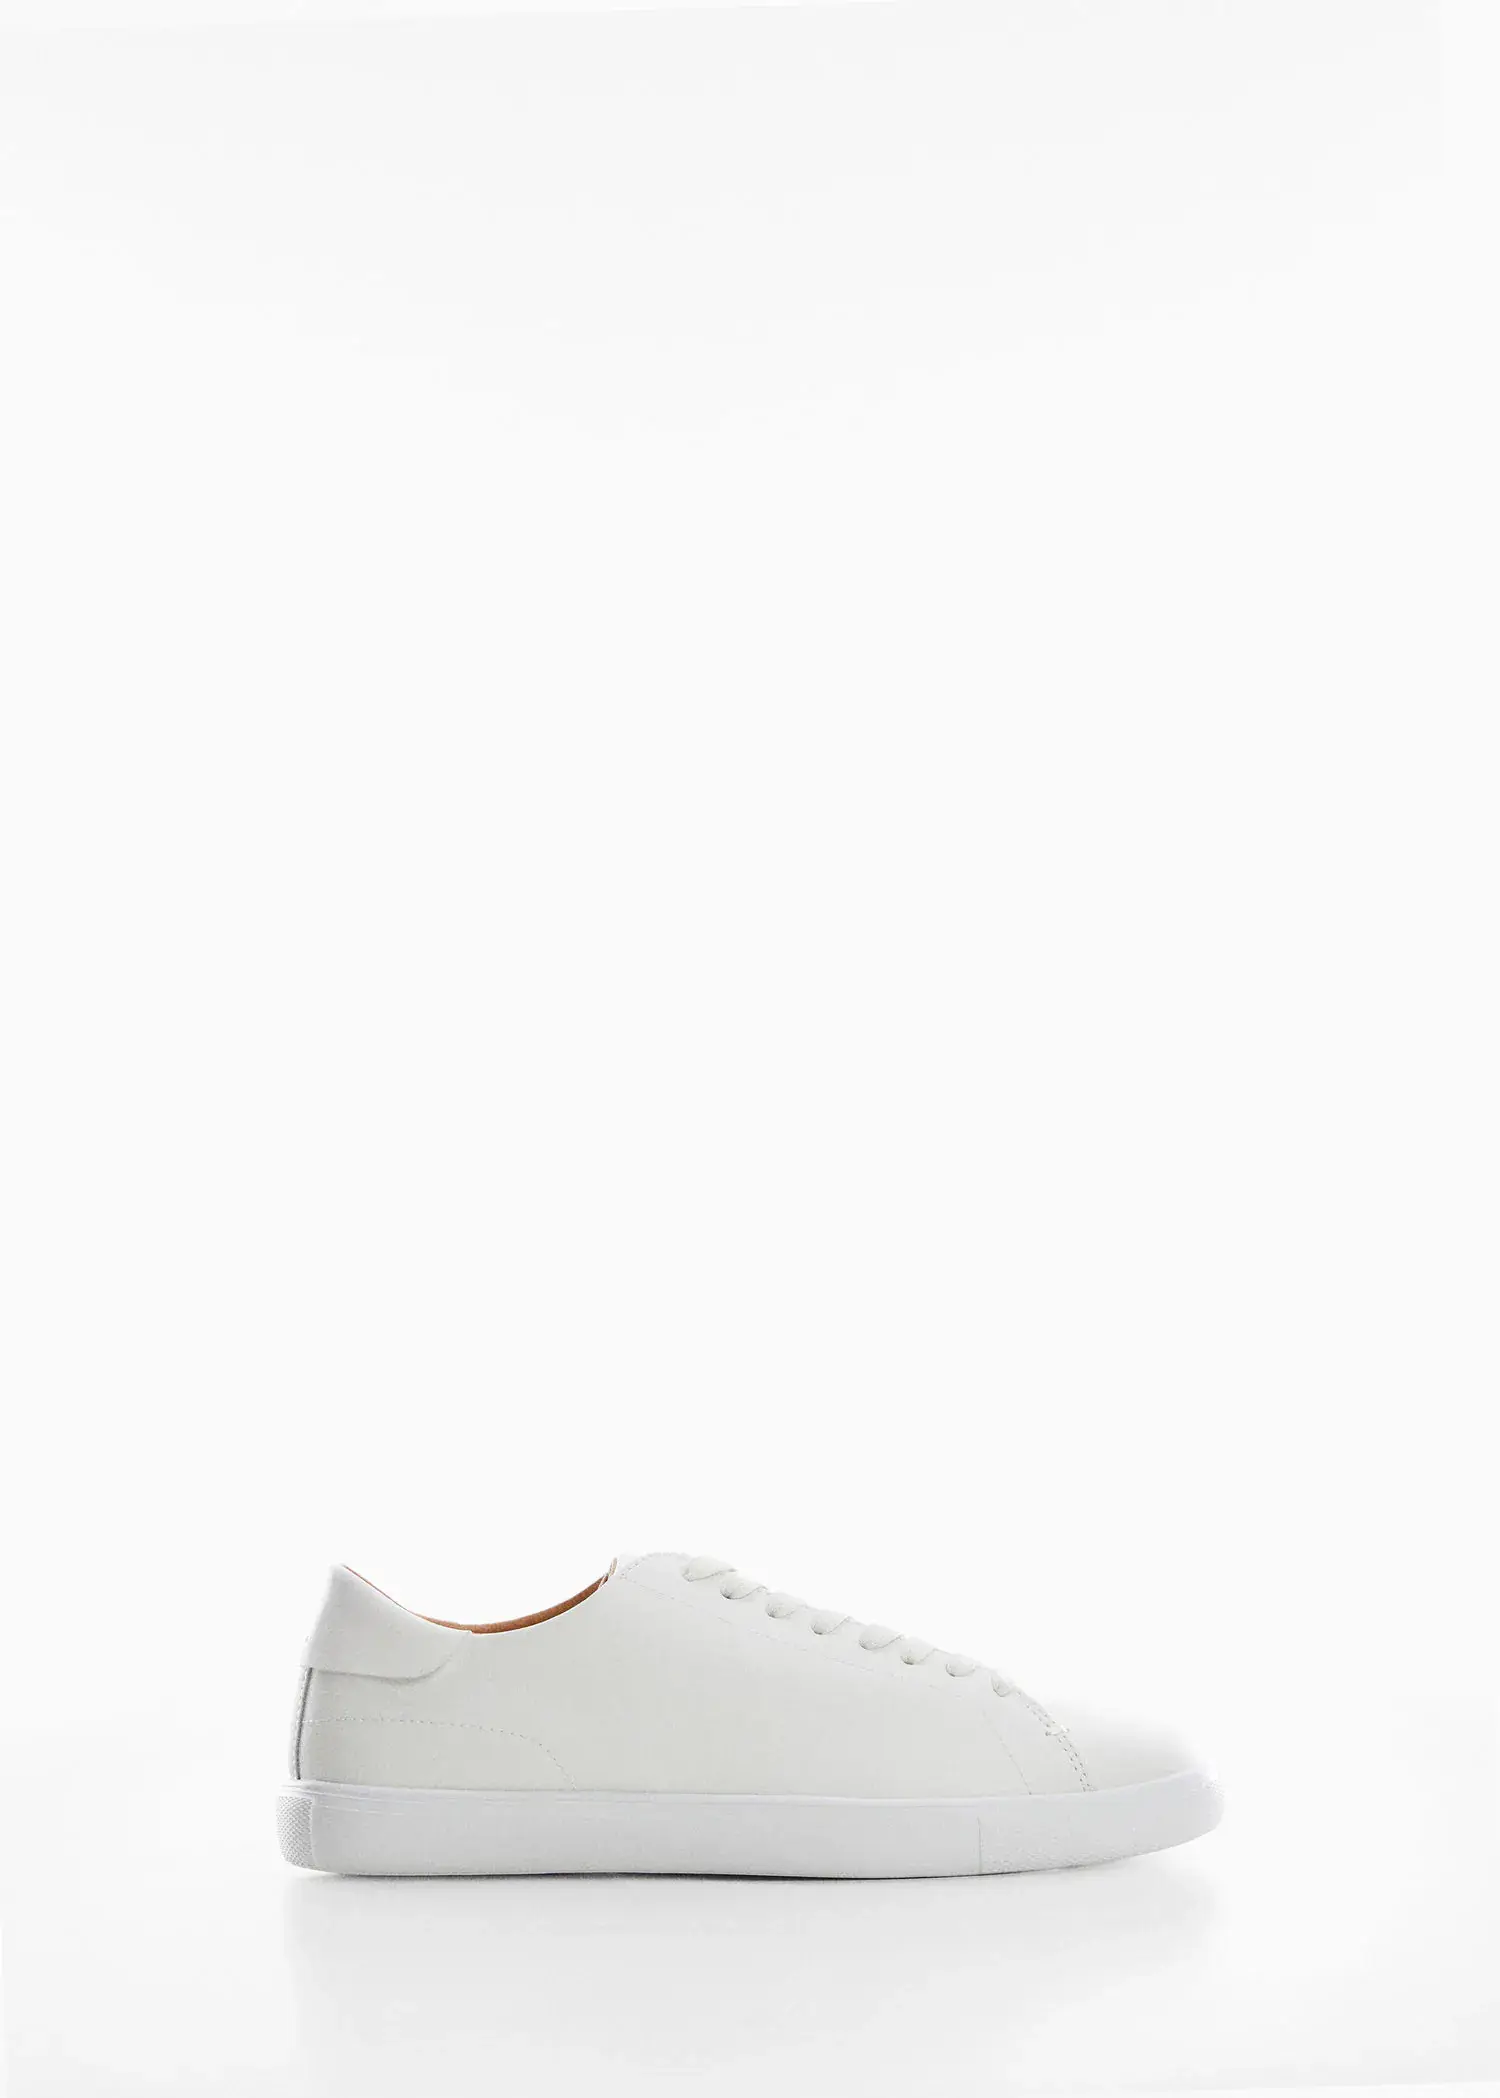 Mango Monocoloured leather sneakers. a pair of white shoes on a white background. 